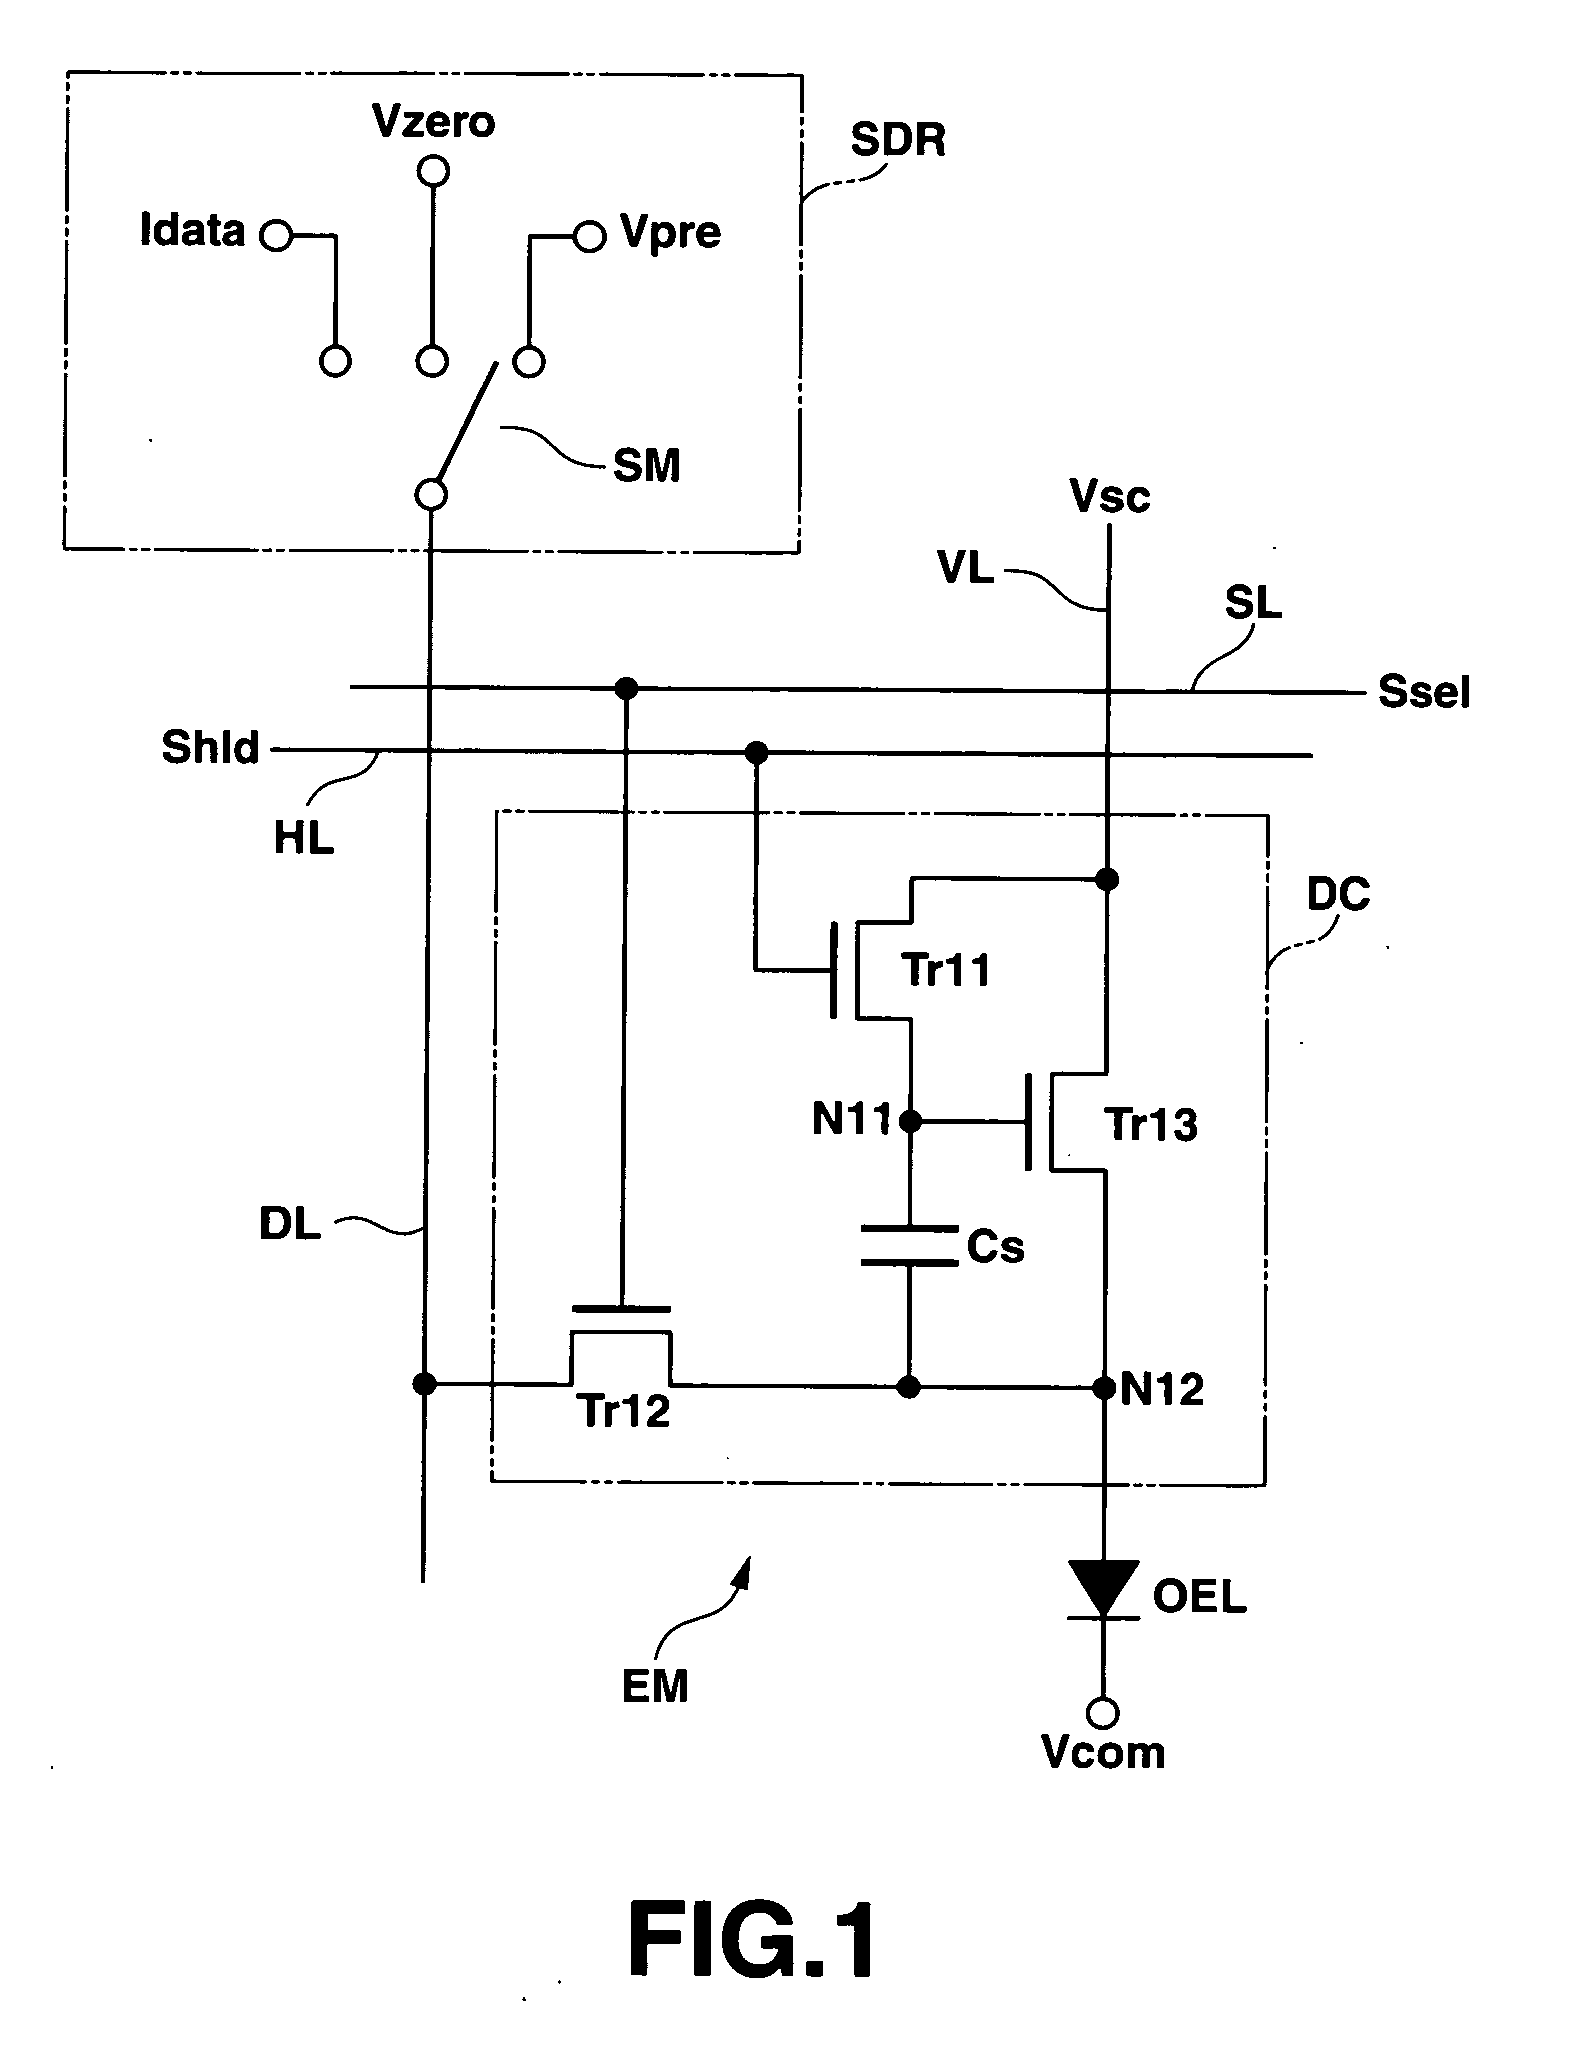 Light emission drive circuit and its drive control method and display unit and its display drive method